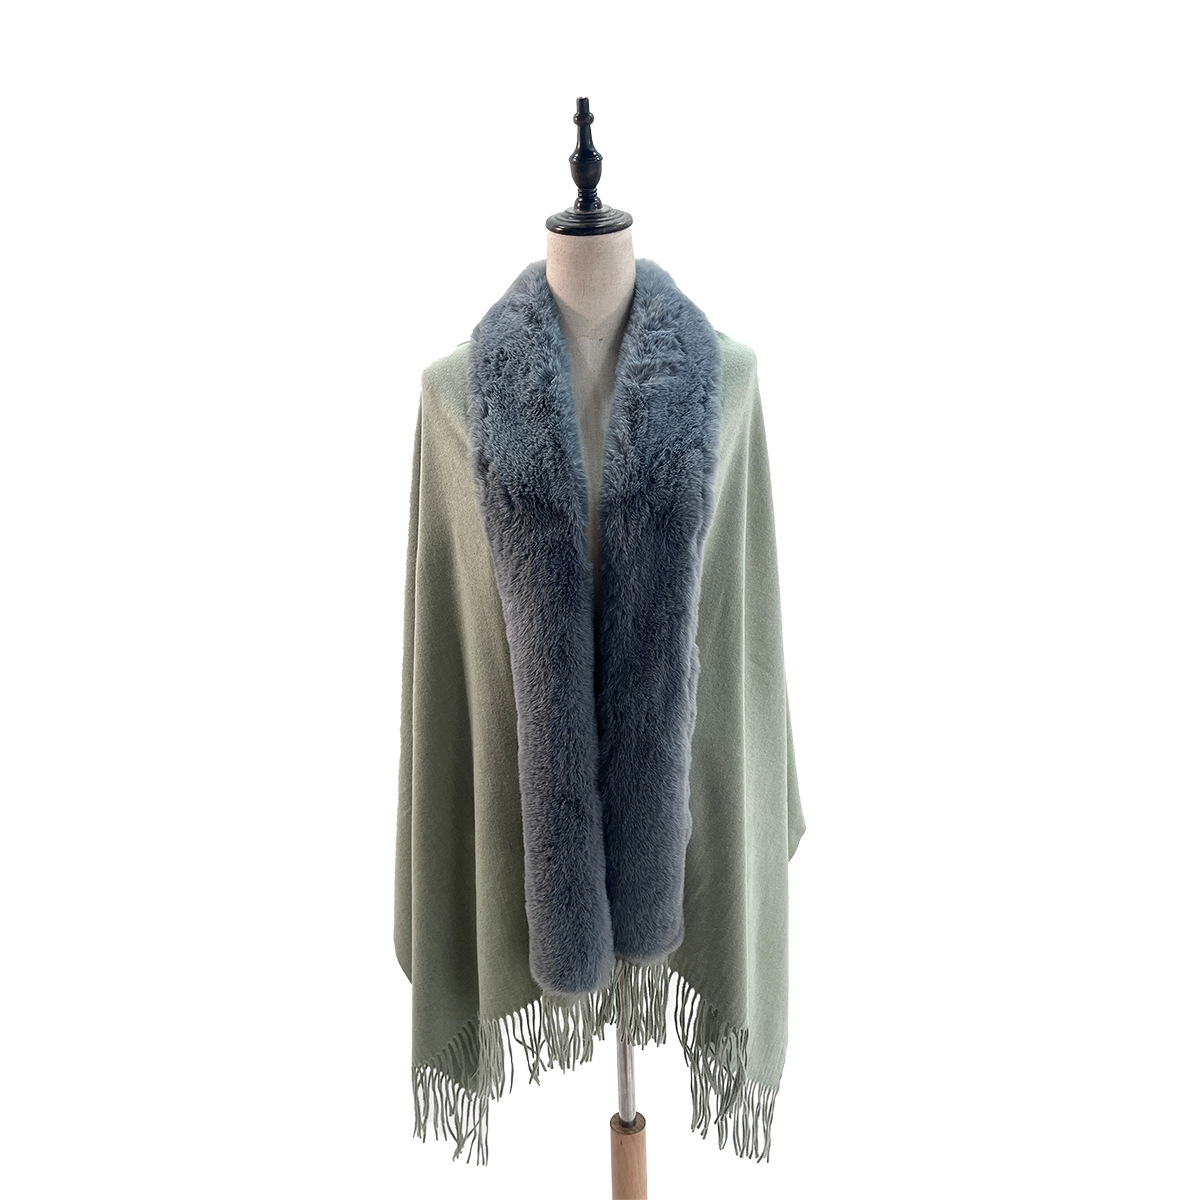 2023 European and American Winter Hot-Selling New Arrival Scarf Warm Women's Fur Collar Scarf Shawl Dual-Use Thickened Dress Shawl